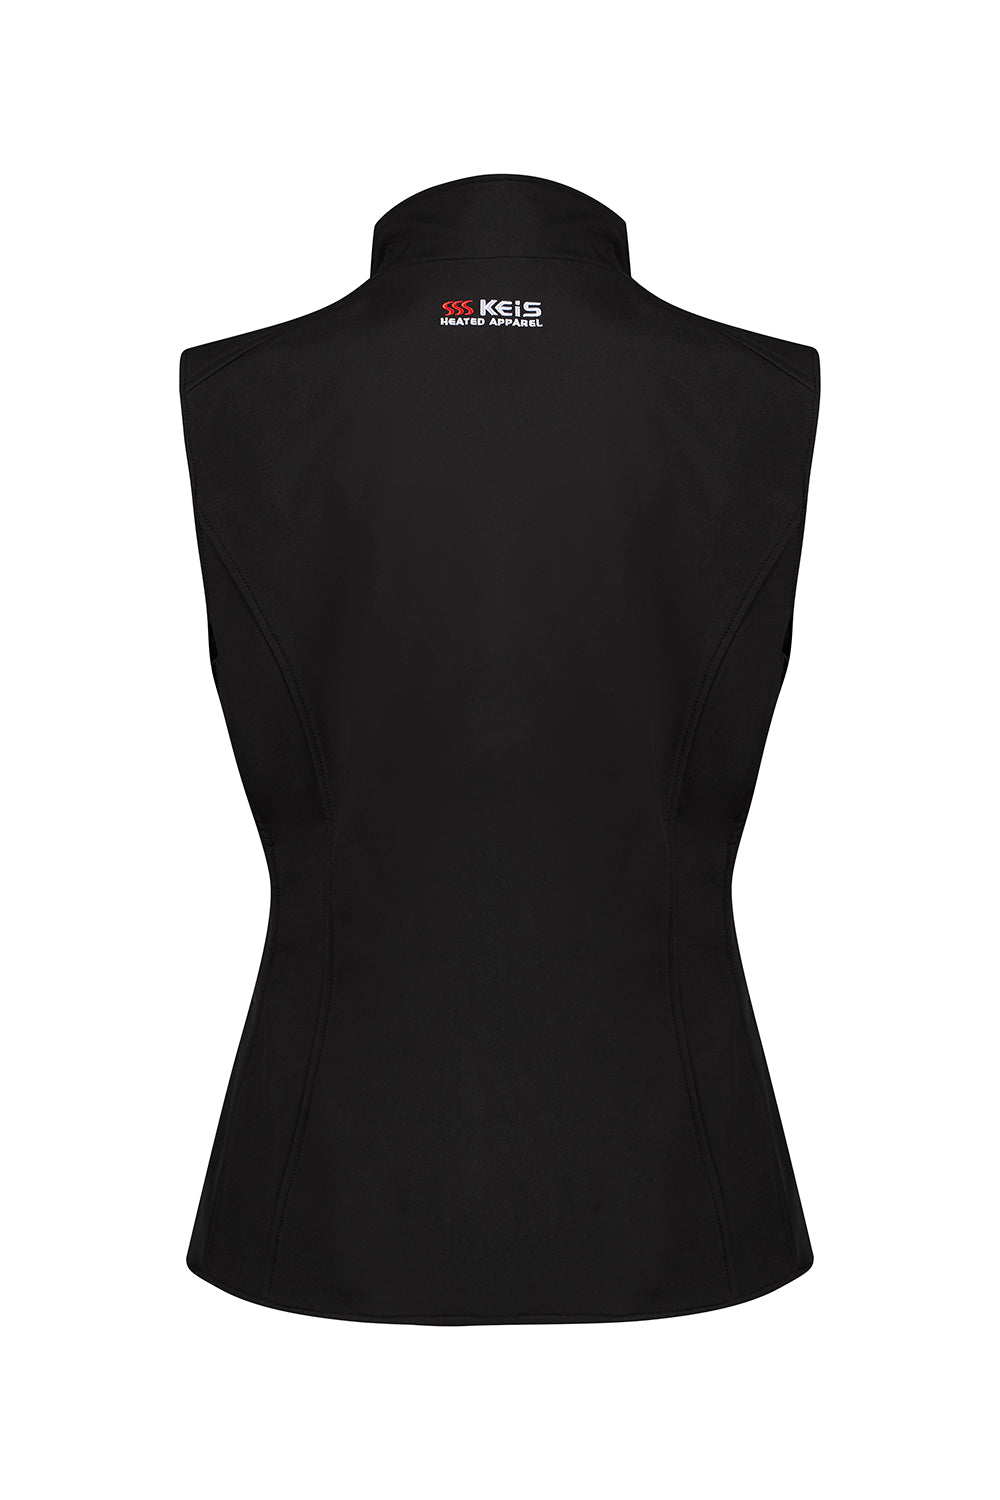 Keis ladies bodywarmer balck with red piping and logo